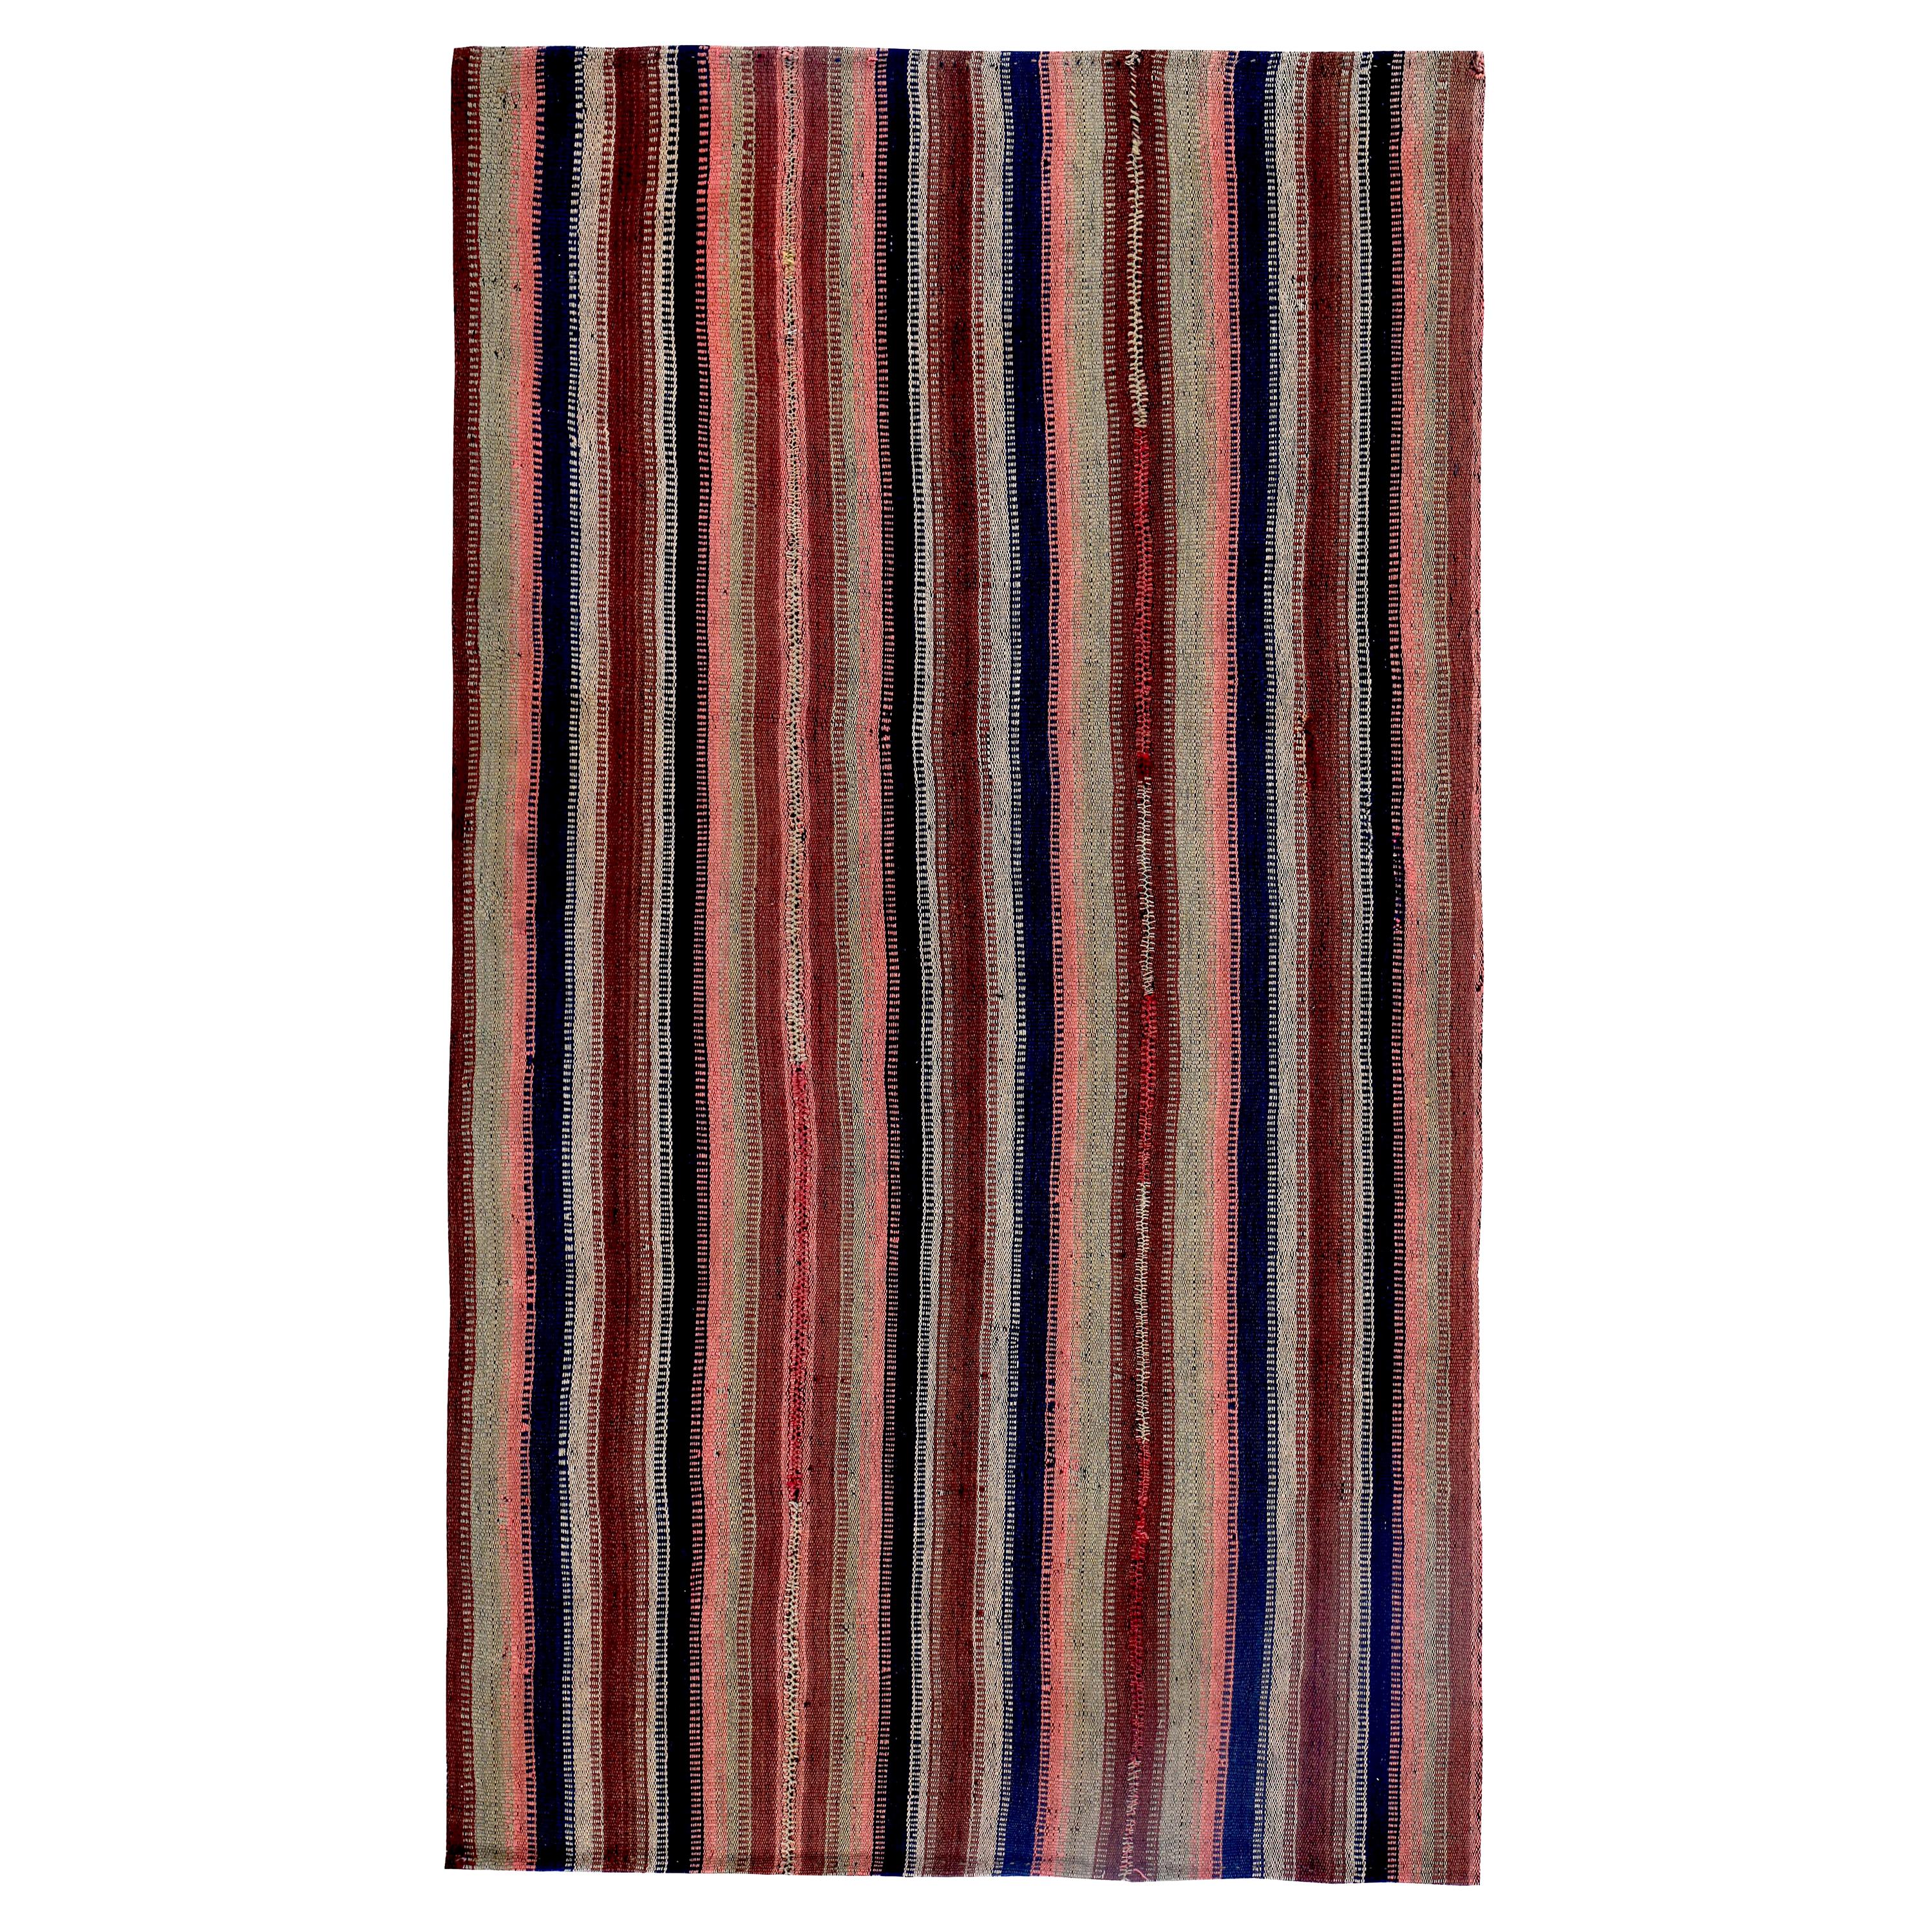 Turkish Kilim Rug with Navy, Brown and Pink Stripes on Ivory Field